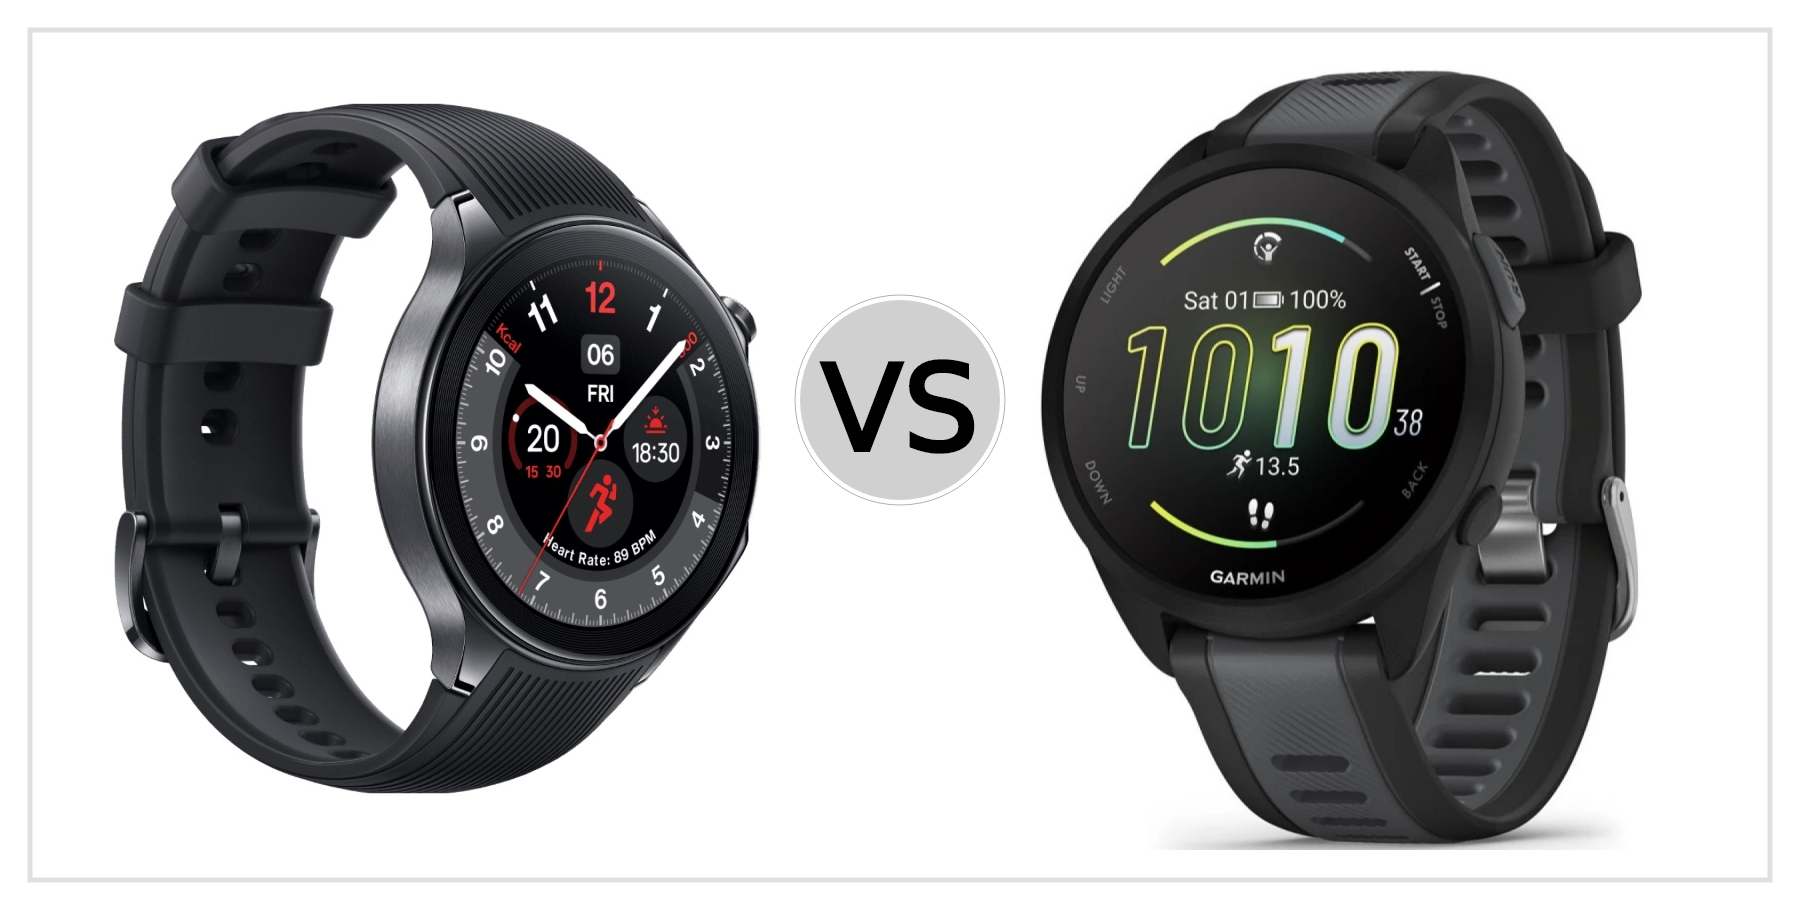 Compare OnePlus Watch 2 VS Garmin Forerunner 165 Music to see which is better